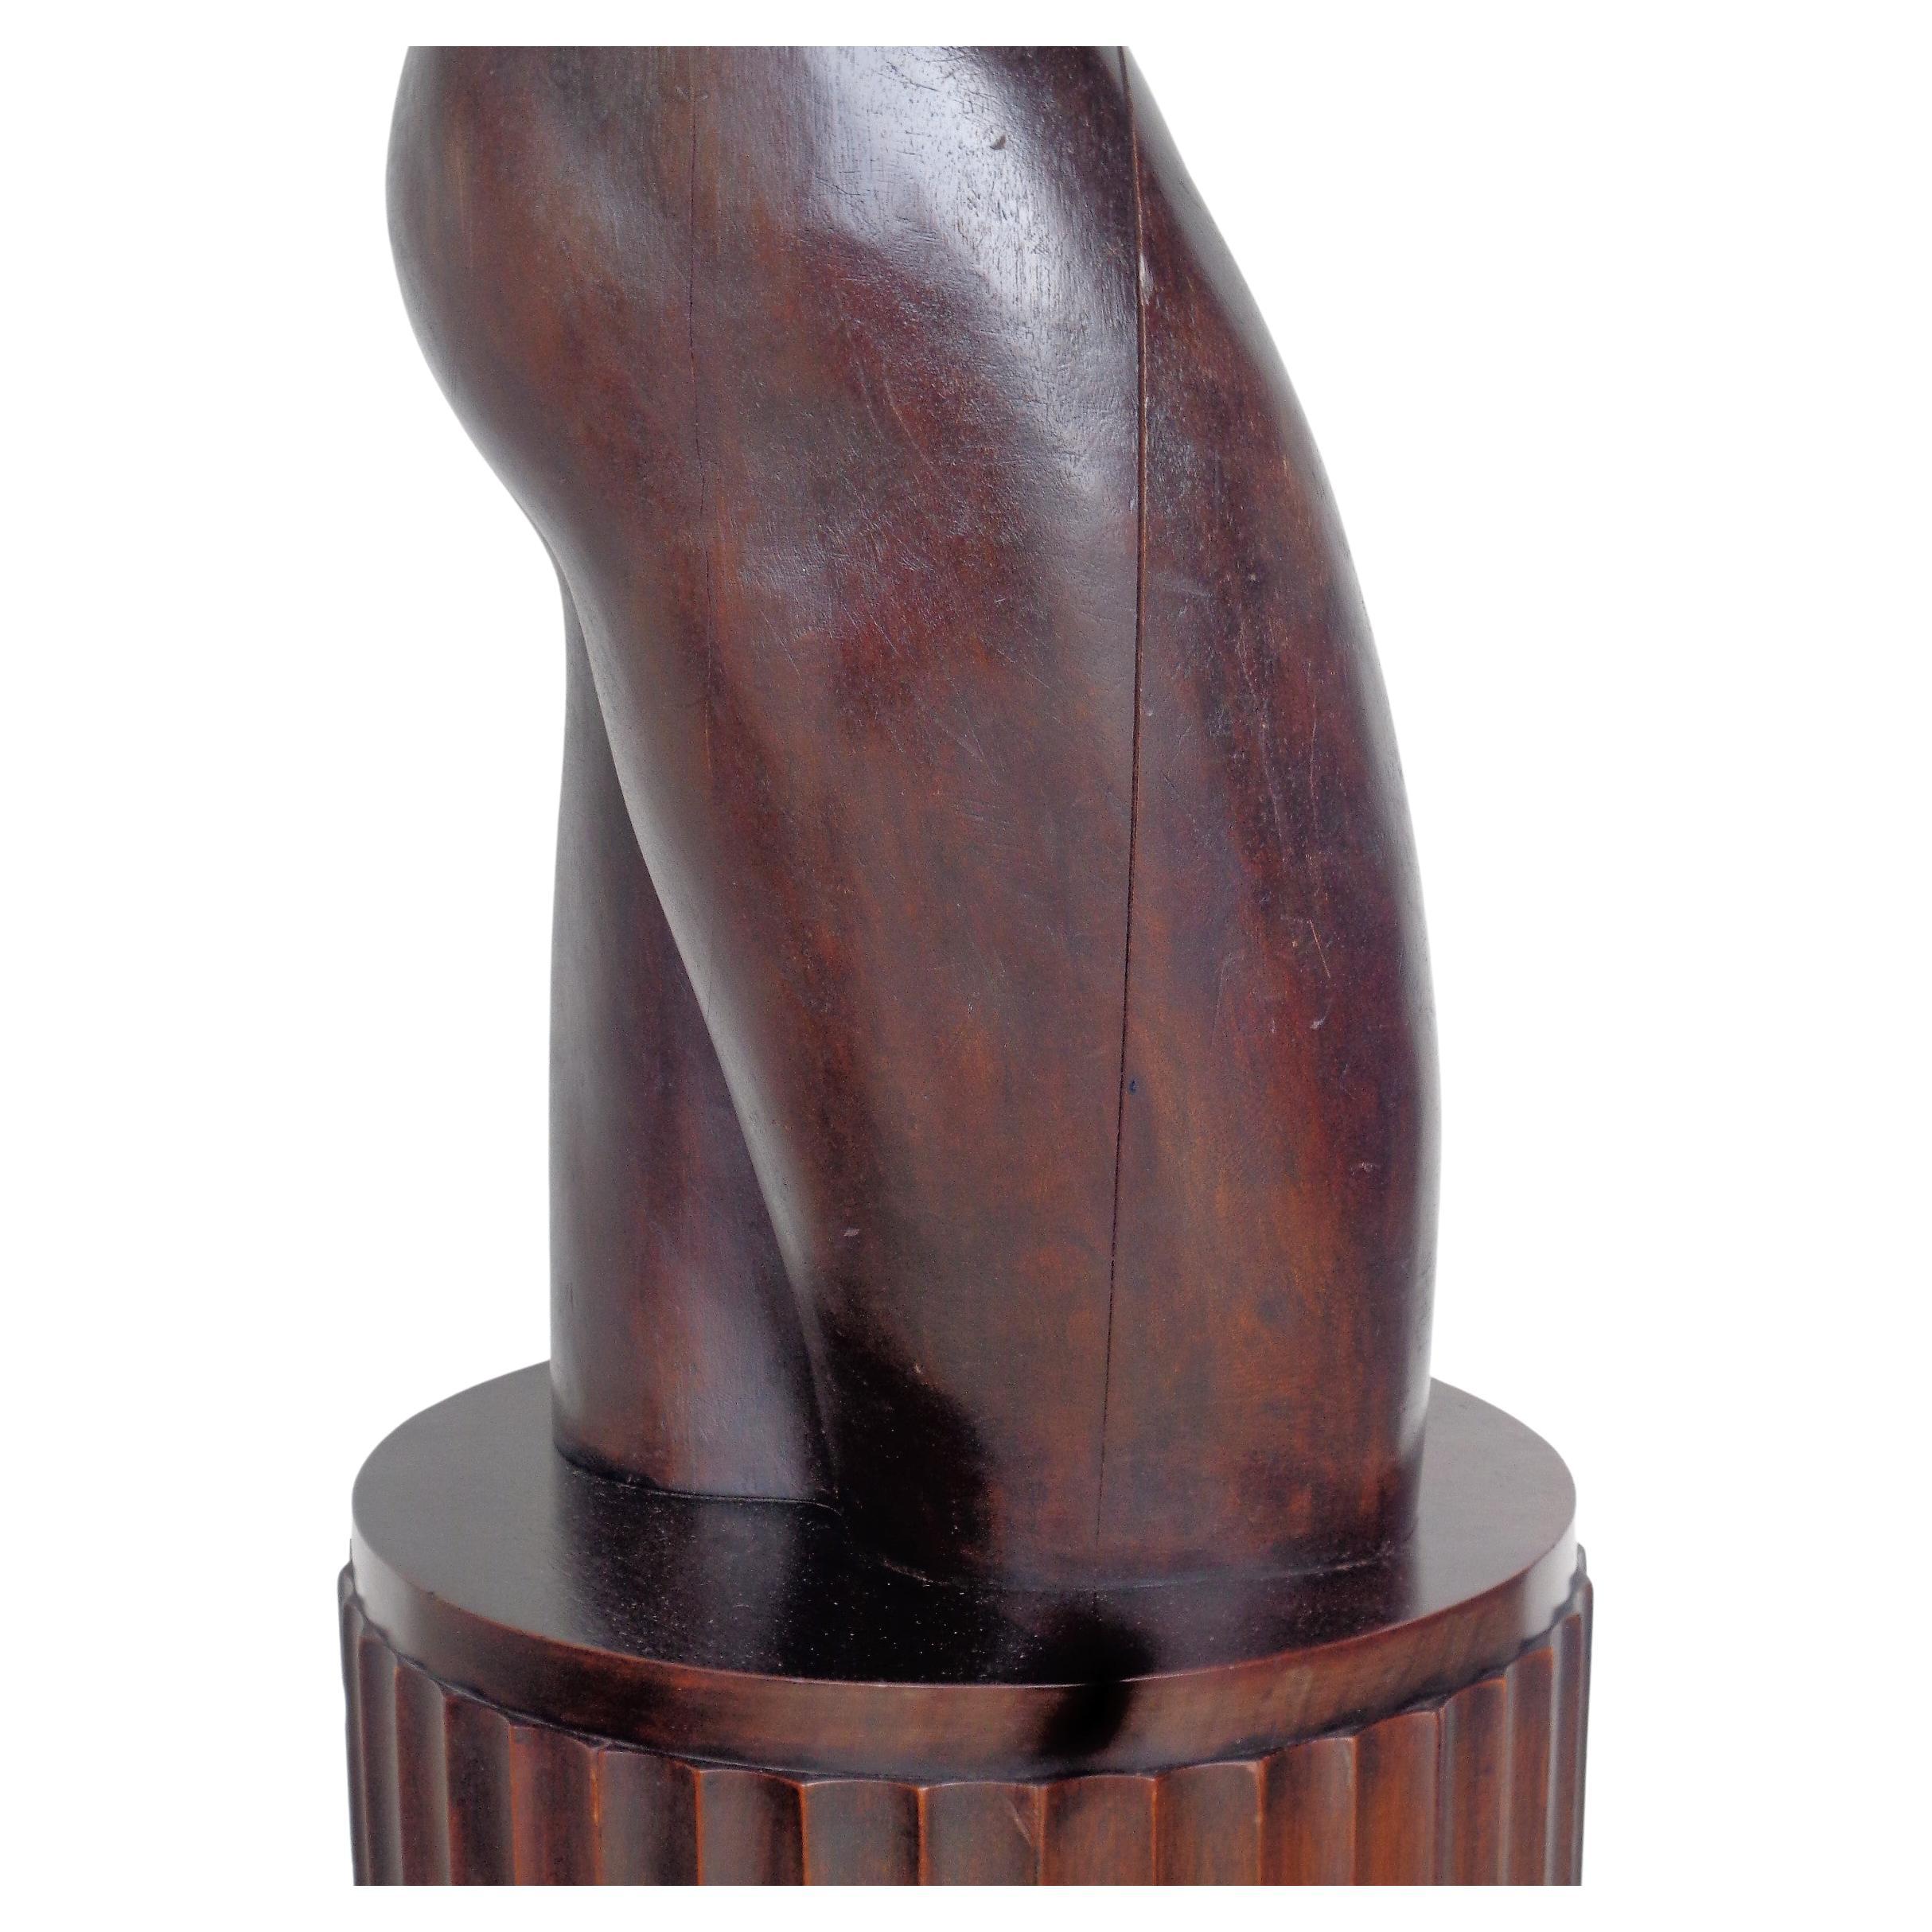 French Art Deco Walnut Sculpture Nude Woman, circa 1920 For Sale 7